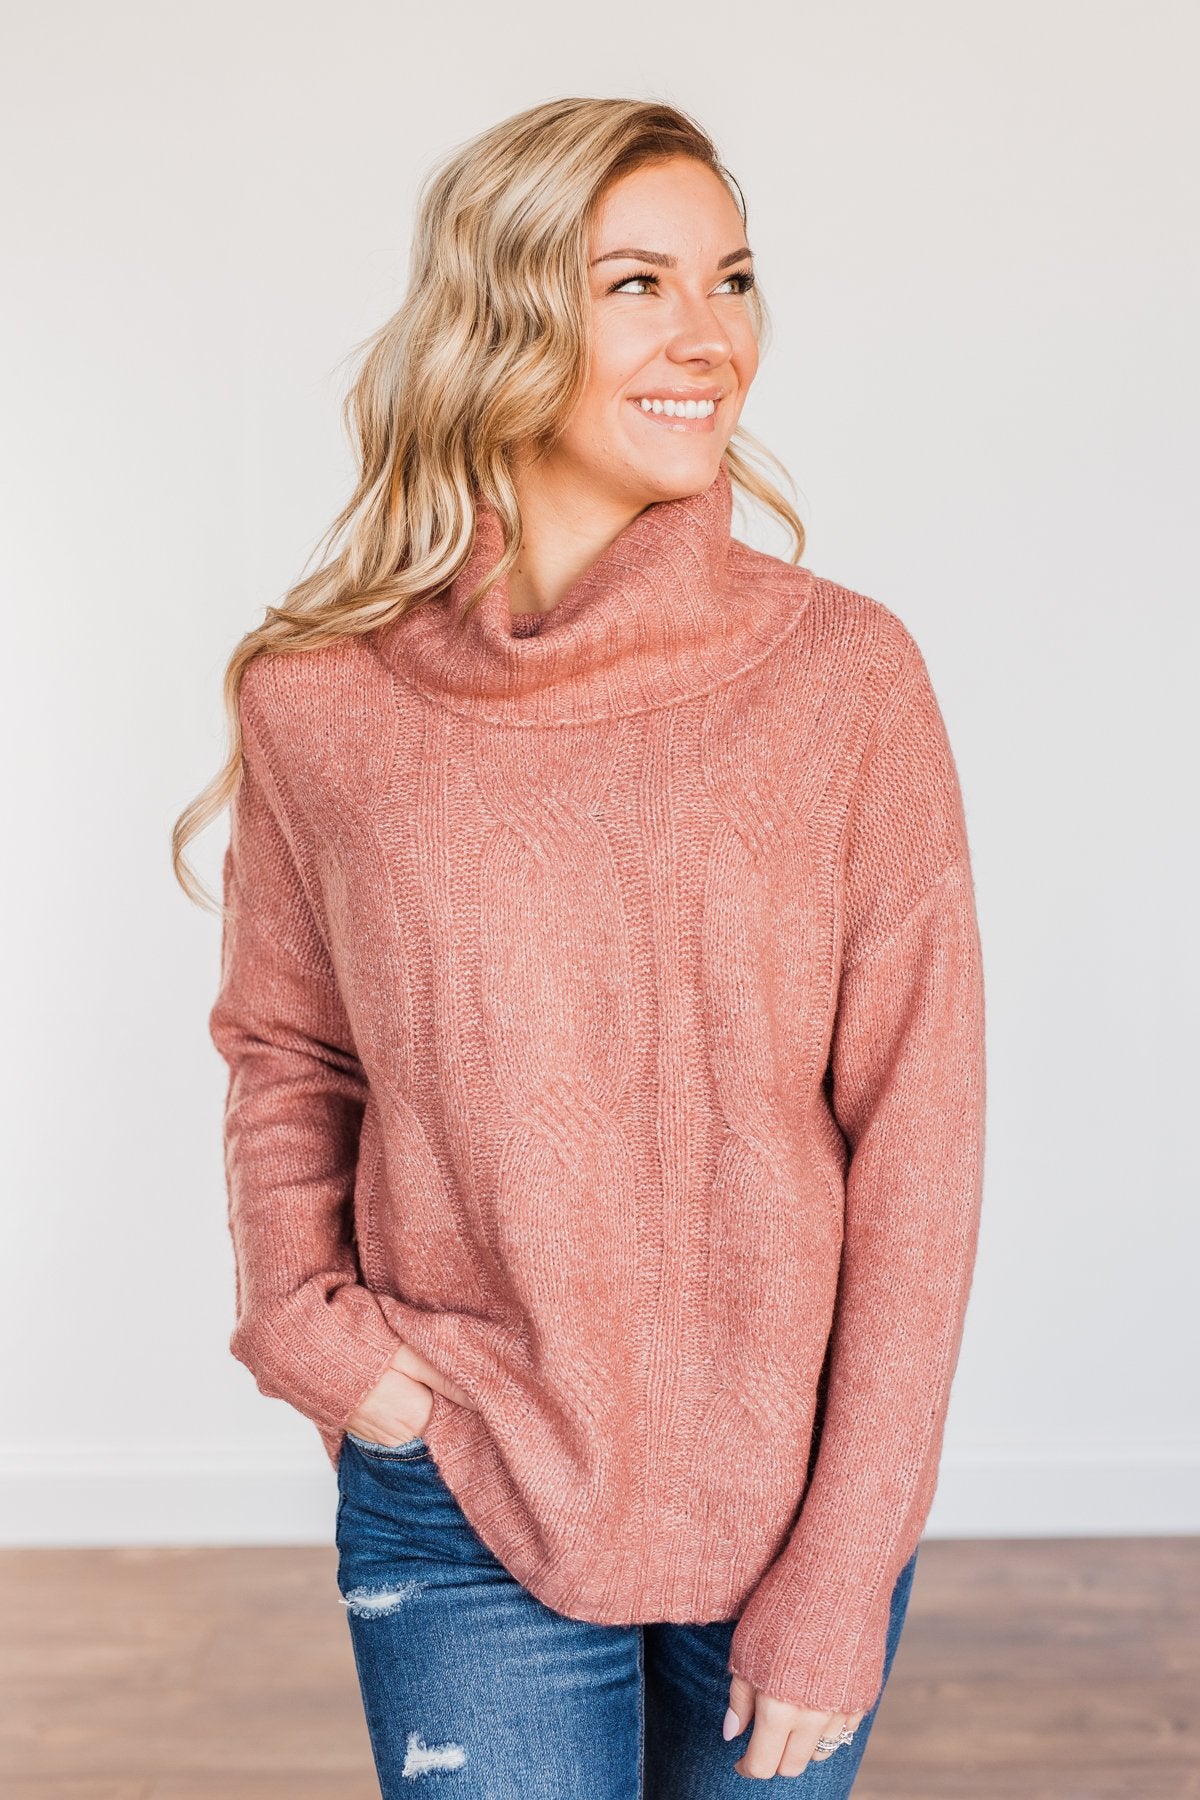 Greatest Blessings Knit Cowl Neck Sweater- Mauve